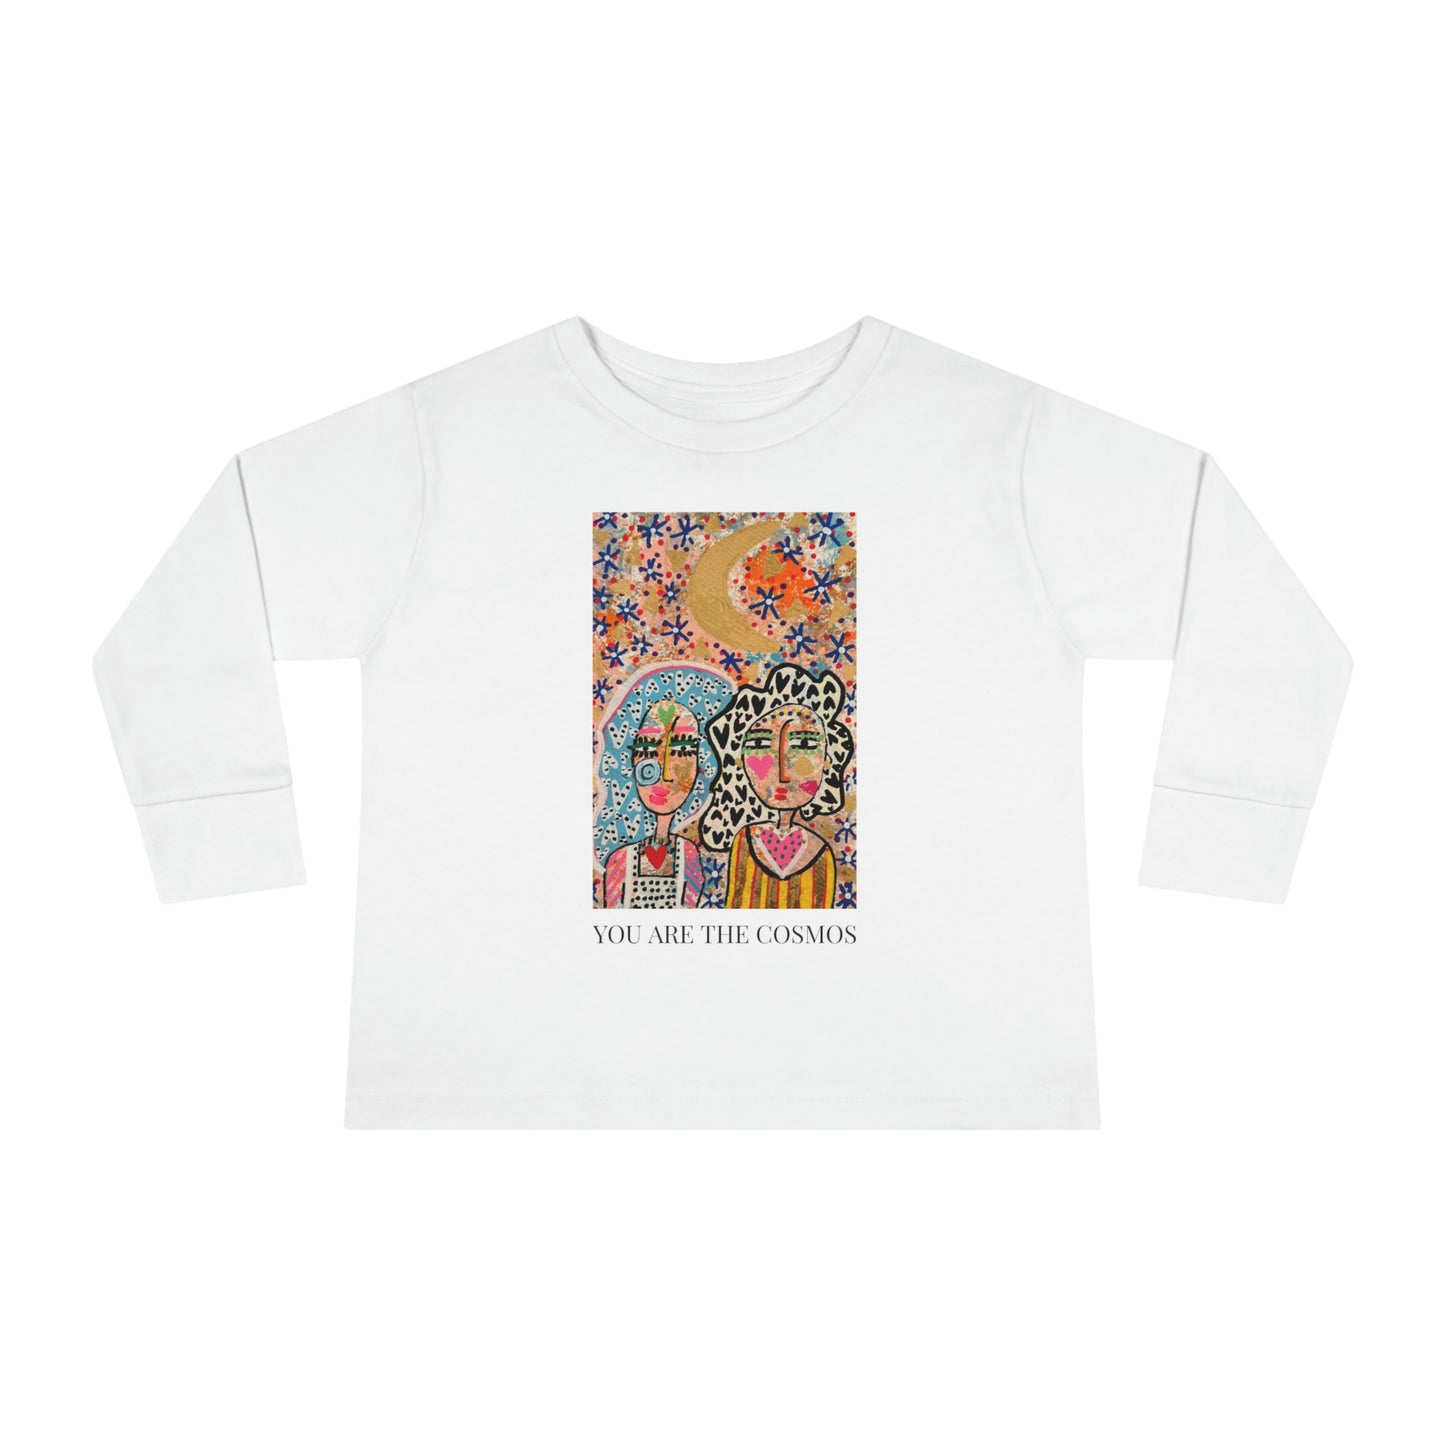 "YOU ARE THE COSMOS" GIRL TALK ART Toddler Long Sleeve Tee